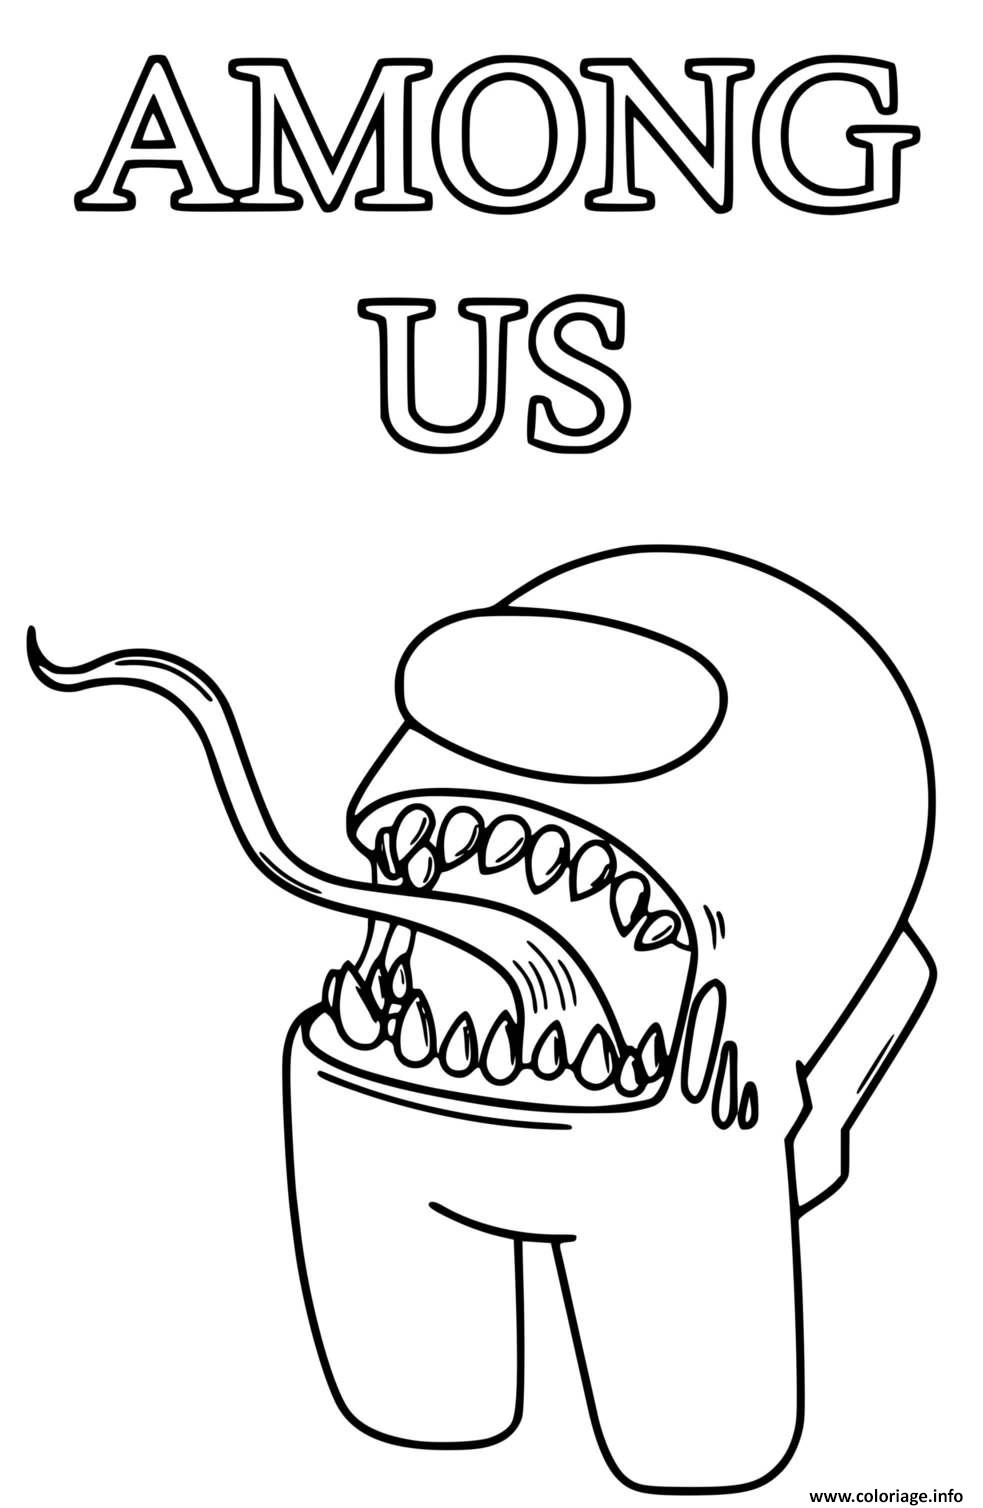 among us coloring pages imposter killing